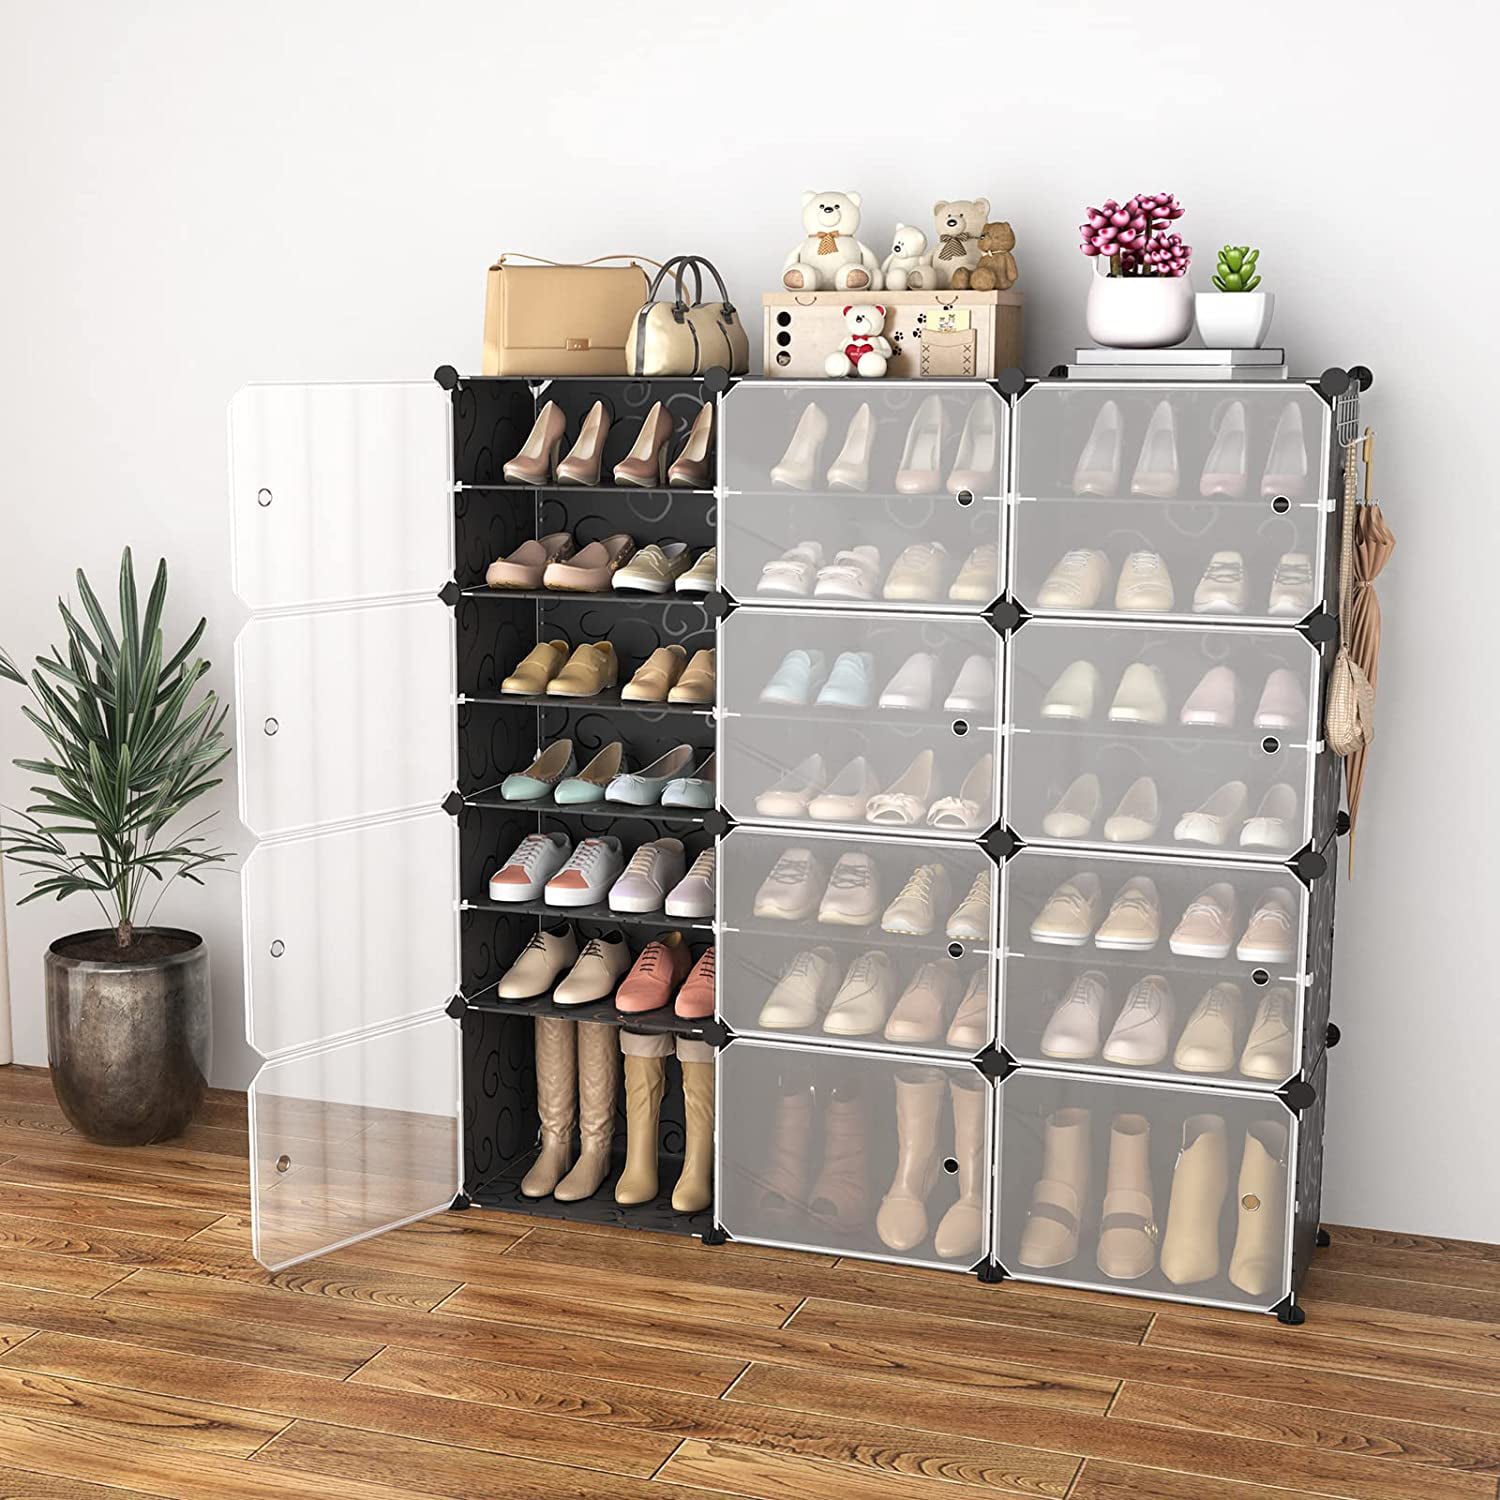  Portable Shoe Rack Organizer, Stackable 96 Pairs DIY Shoe  Storage Cabinets Stand,White Plastic Closet Shoe Organizer With Transparent  Cover,Dust-proof Shoe Rack Shelf Clear Foldable For Heels Boots : Home &  Kitchen